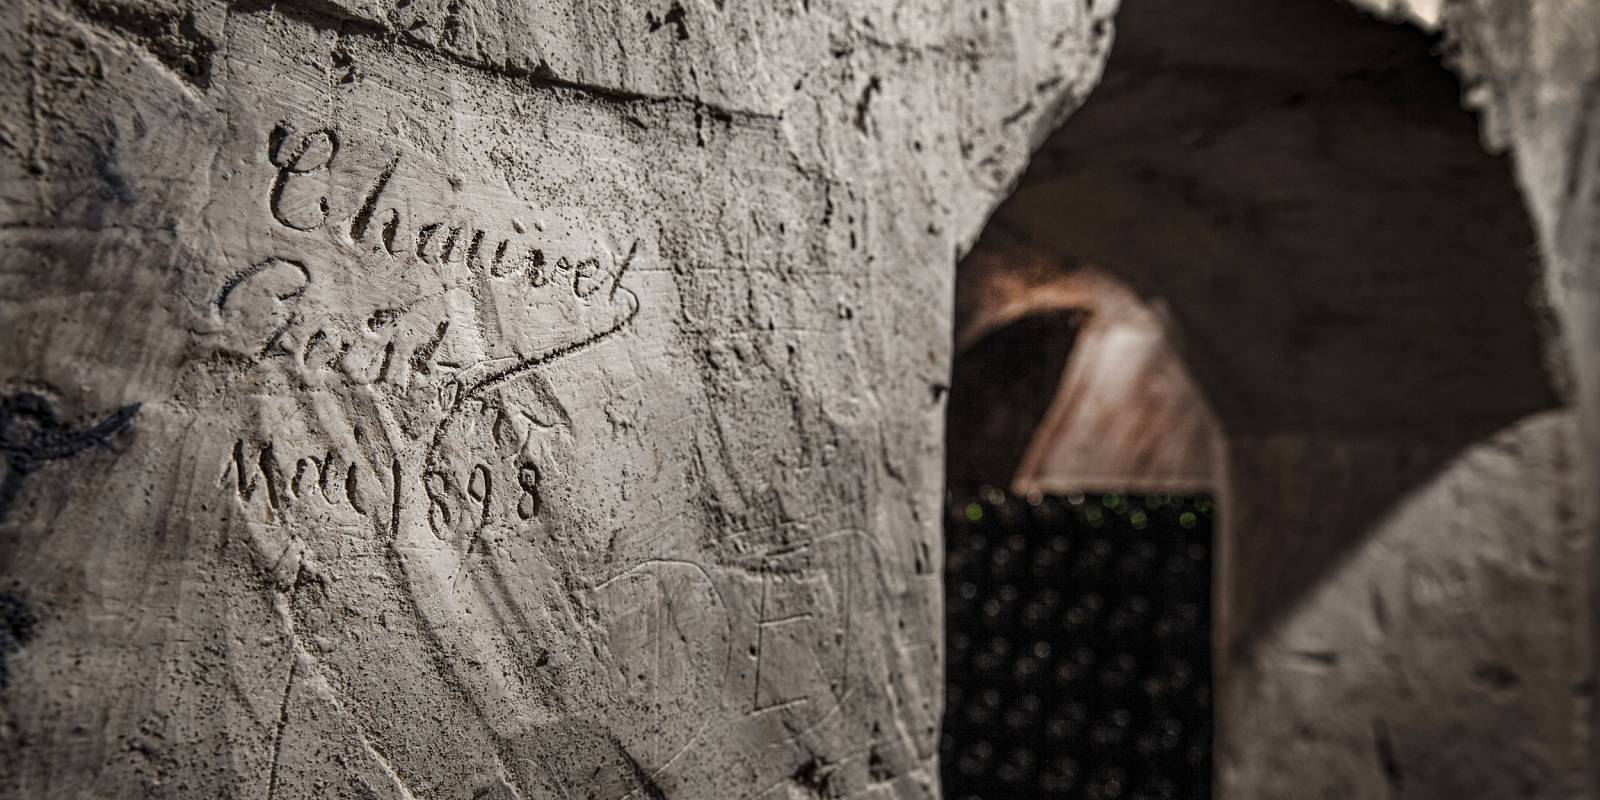 Caves du Champagne A.Chauvet with an inscription on the wall revealing the date May 1898